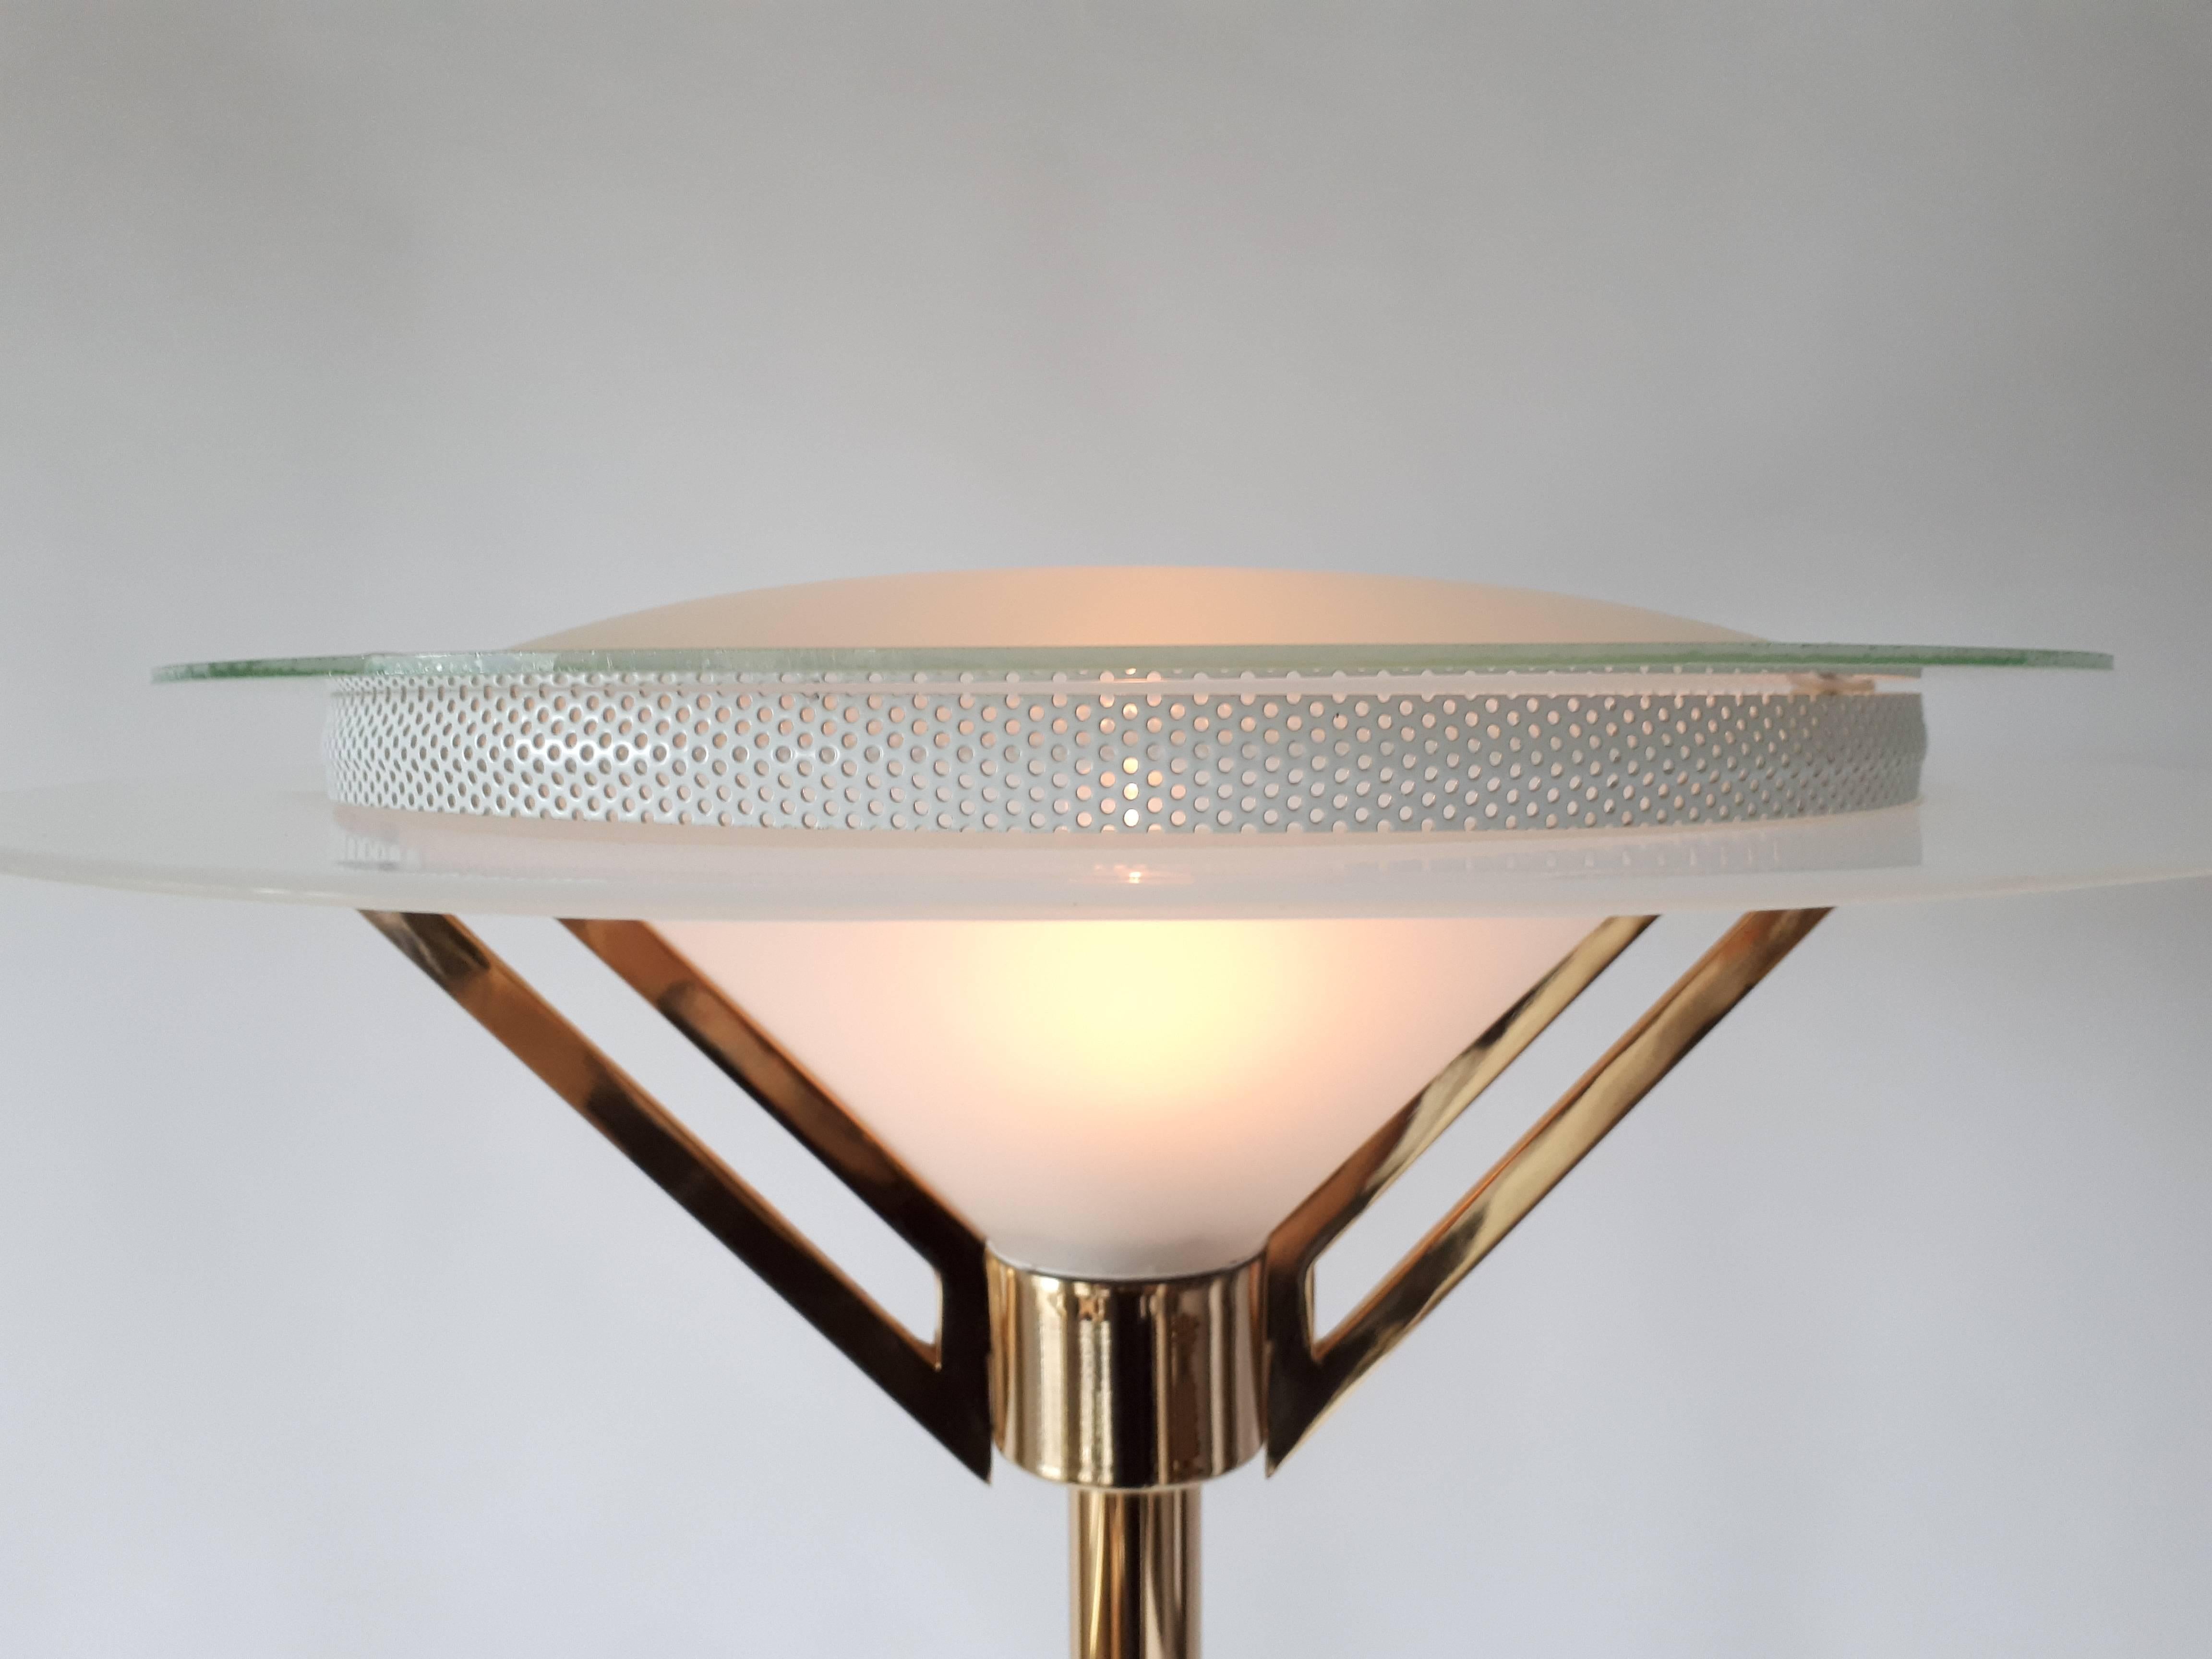 Modern Art Deco Style Gold-Plated & Glass Torchiere Floor Lamp, 1980s , Italia For Sale